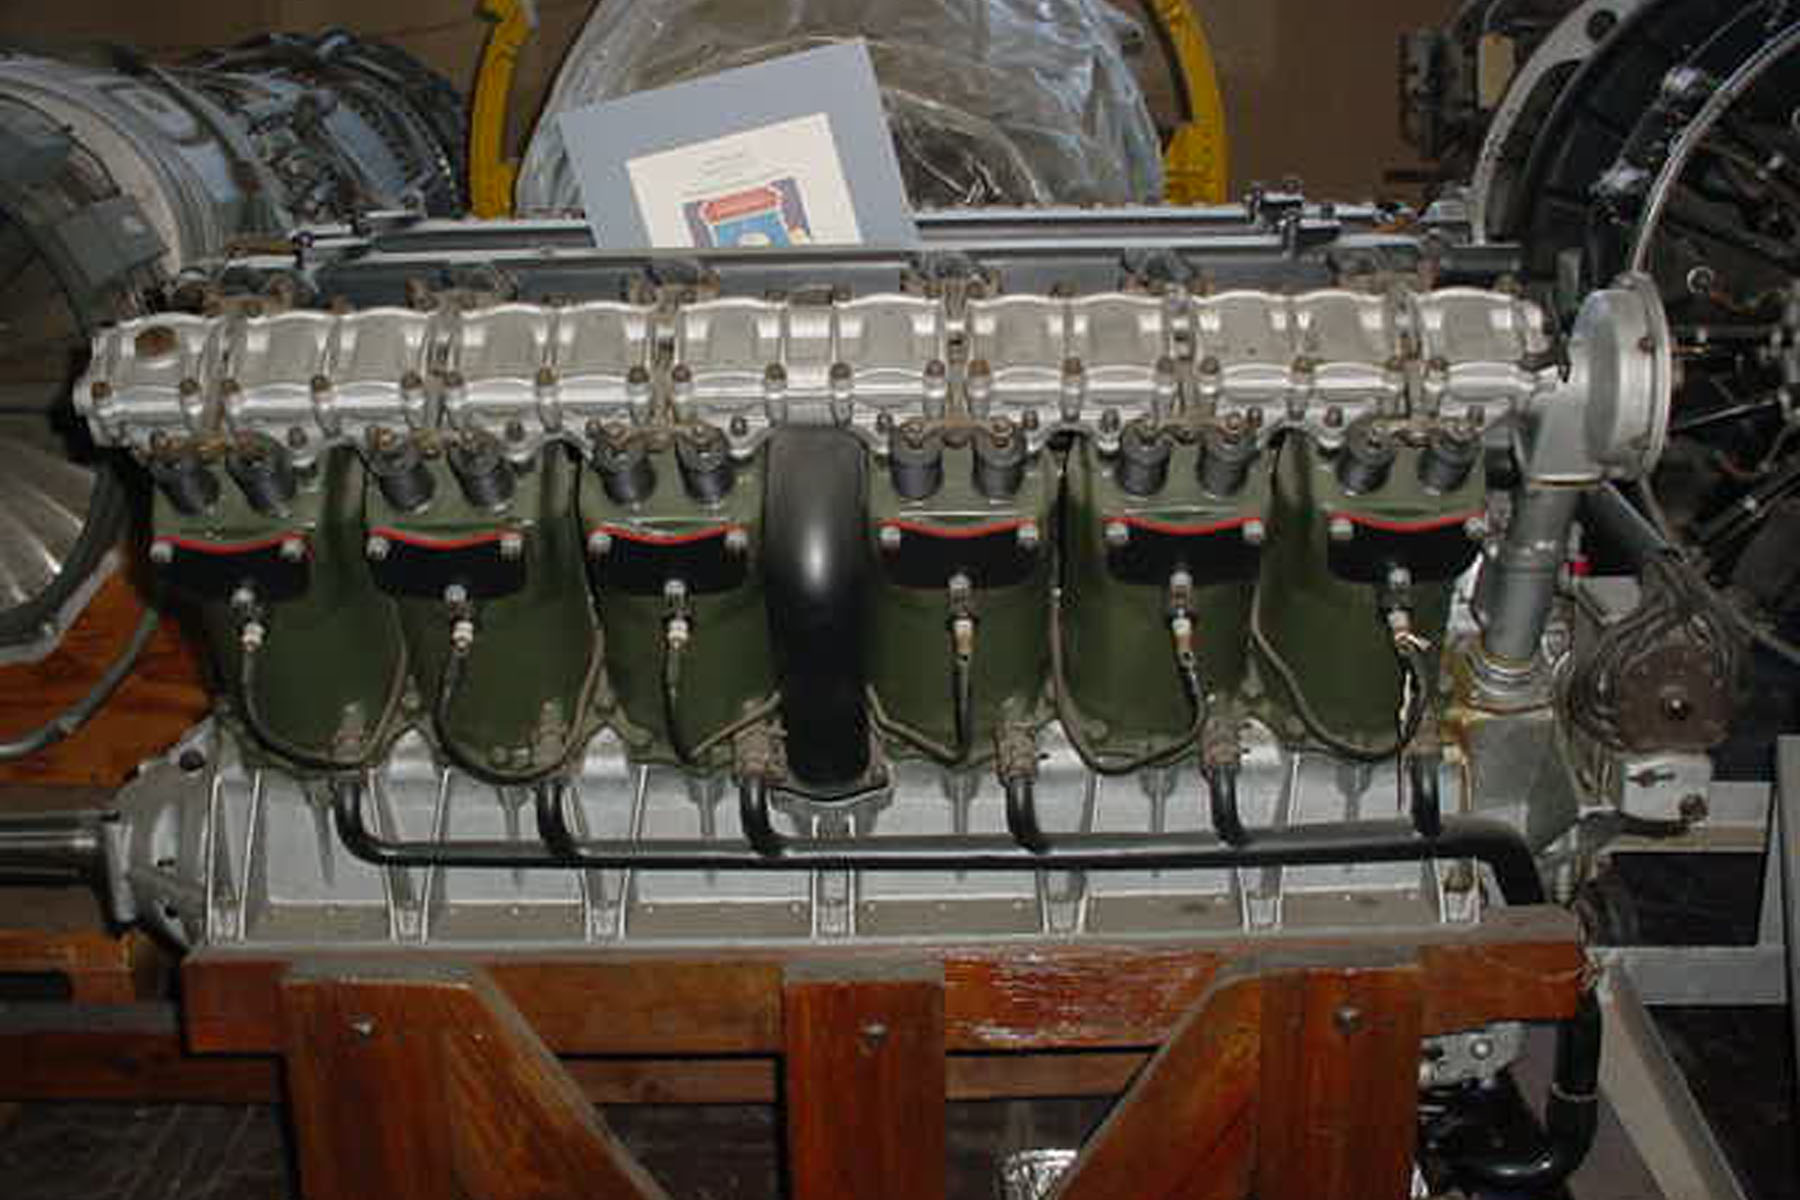 This is the engine from Lt. Moseley's airplane. It is a Packard 1A-2025 60° SOHC V-12, serial number 10. It is in the collection of the National Museum of the United States Air Force. (U.S. Air Force)